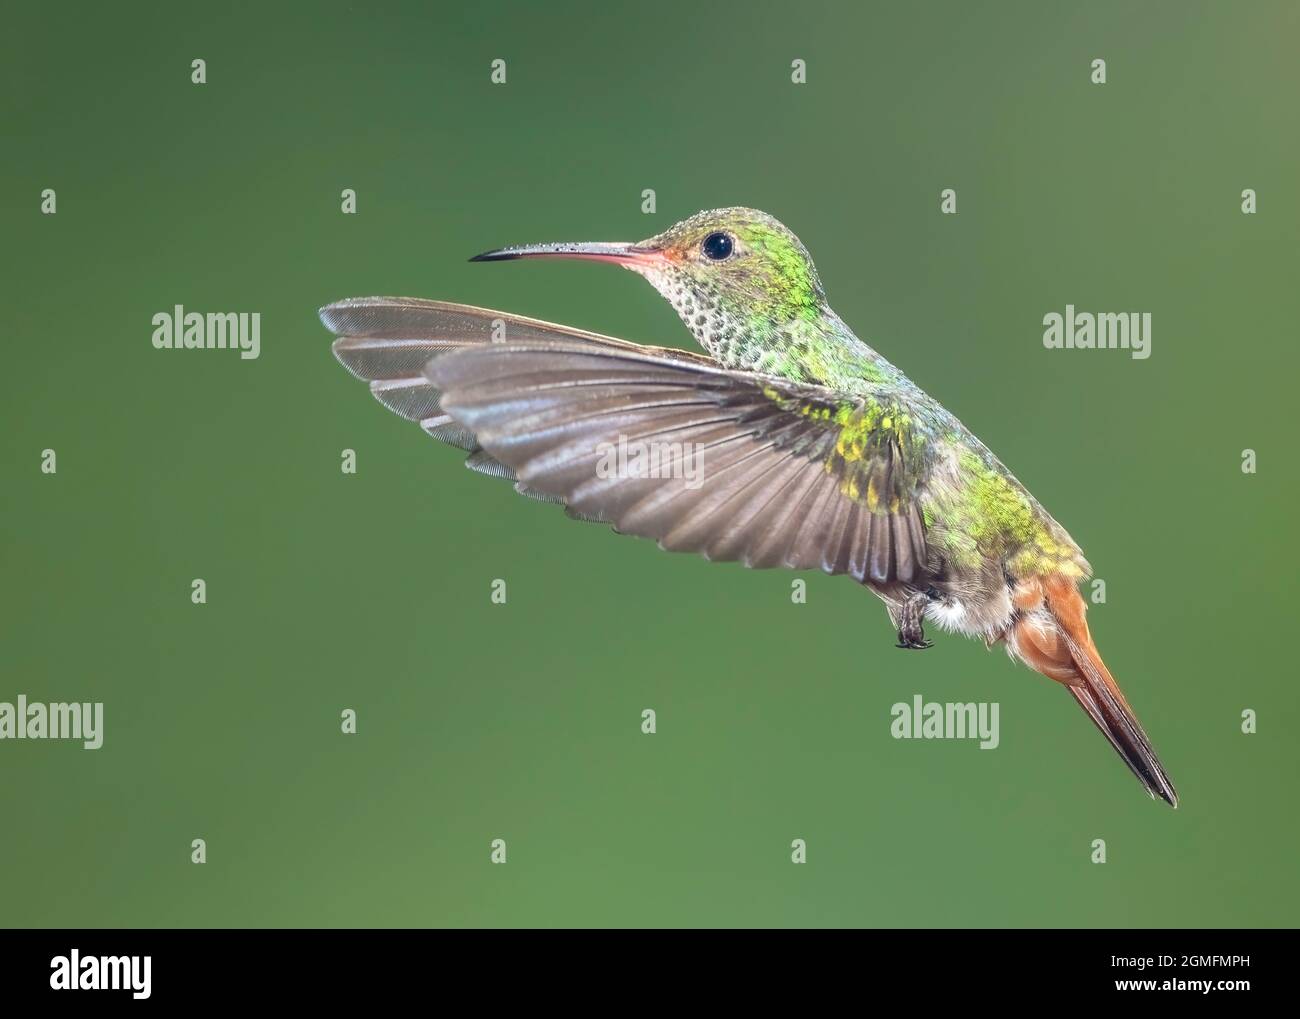 Rufous-tailed Hummingbird (Amazilia tzacatl), hovering in a cloud forest of Costa Rica Stock Photo